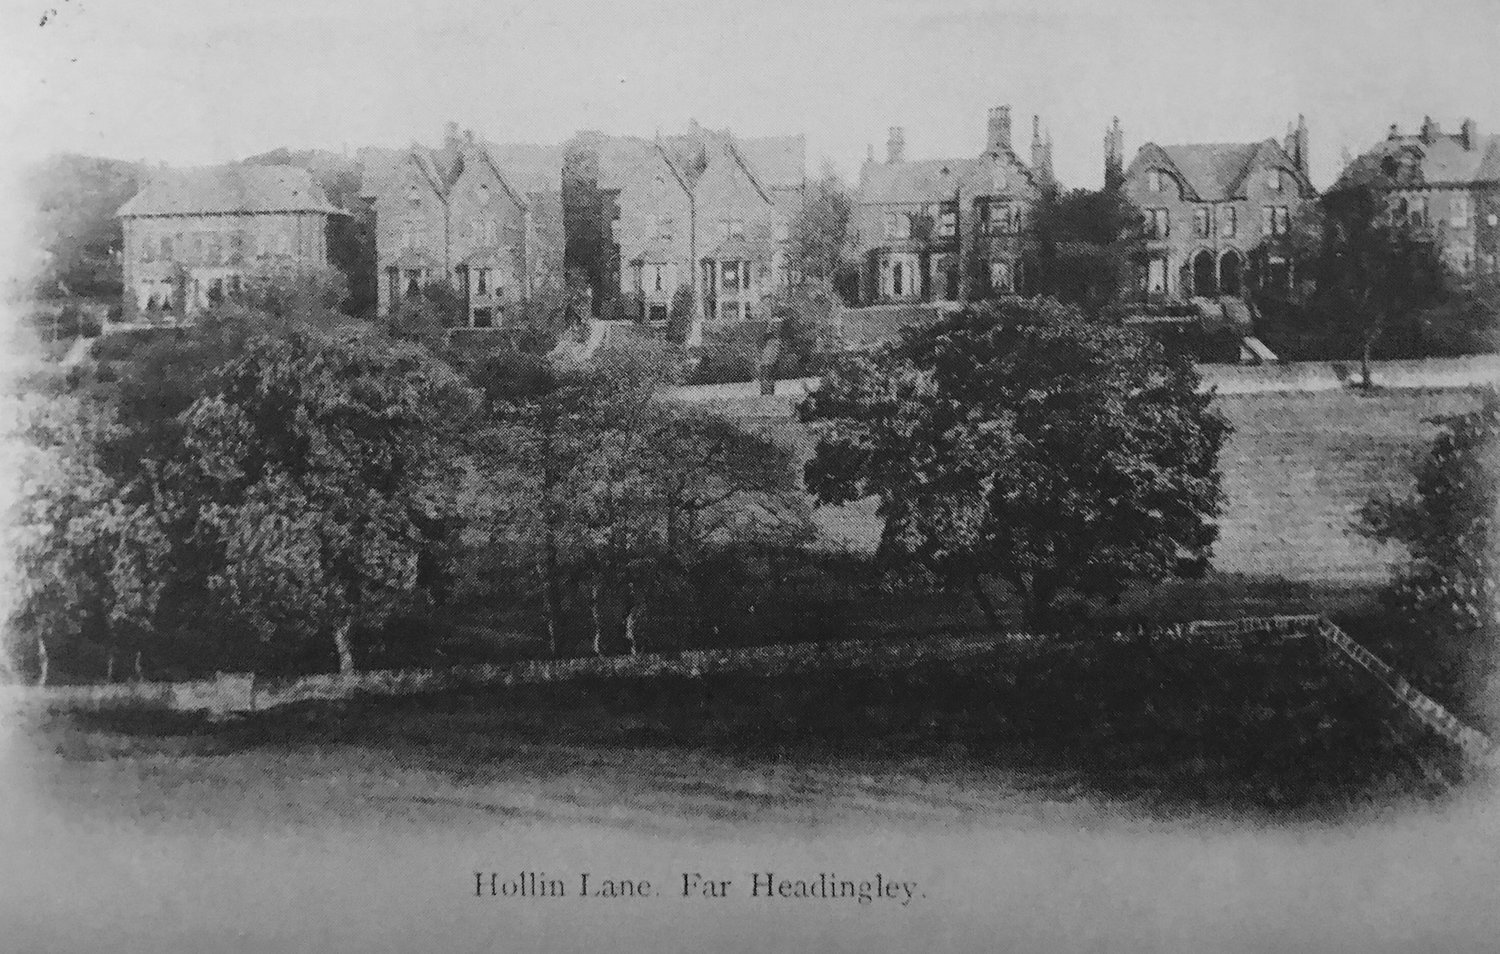 13  Hollin Lane 1915 © Leeds Library and Information Service